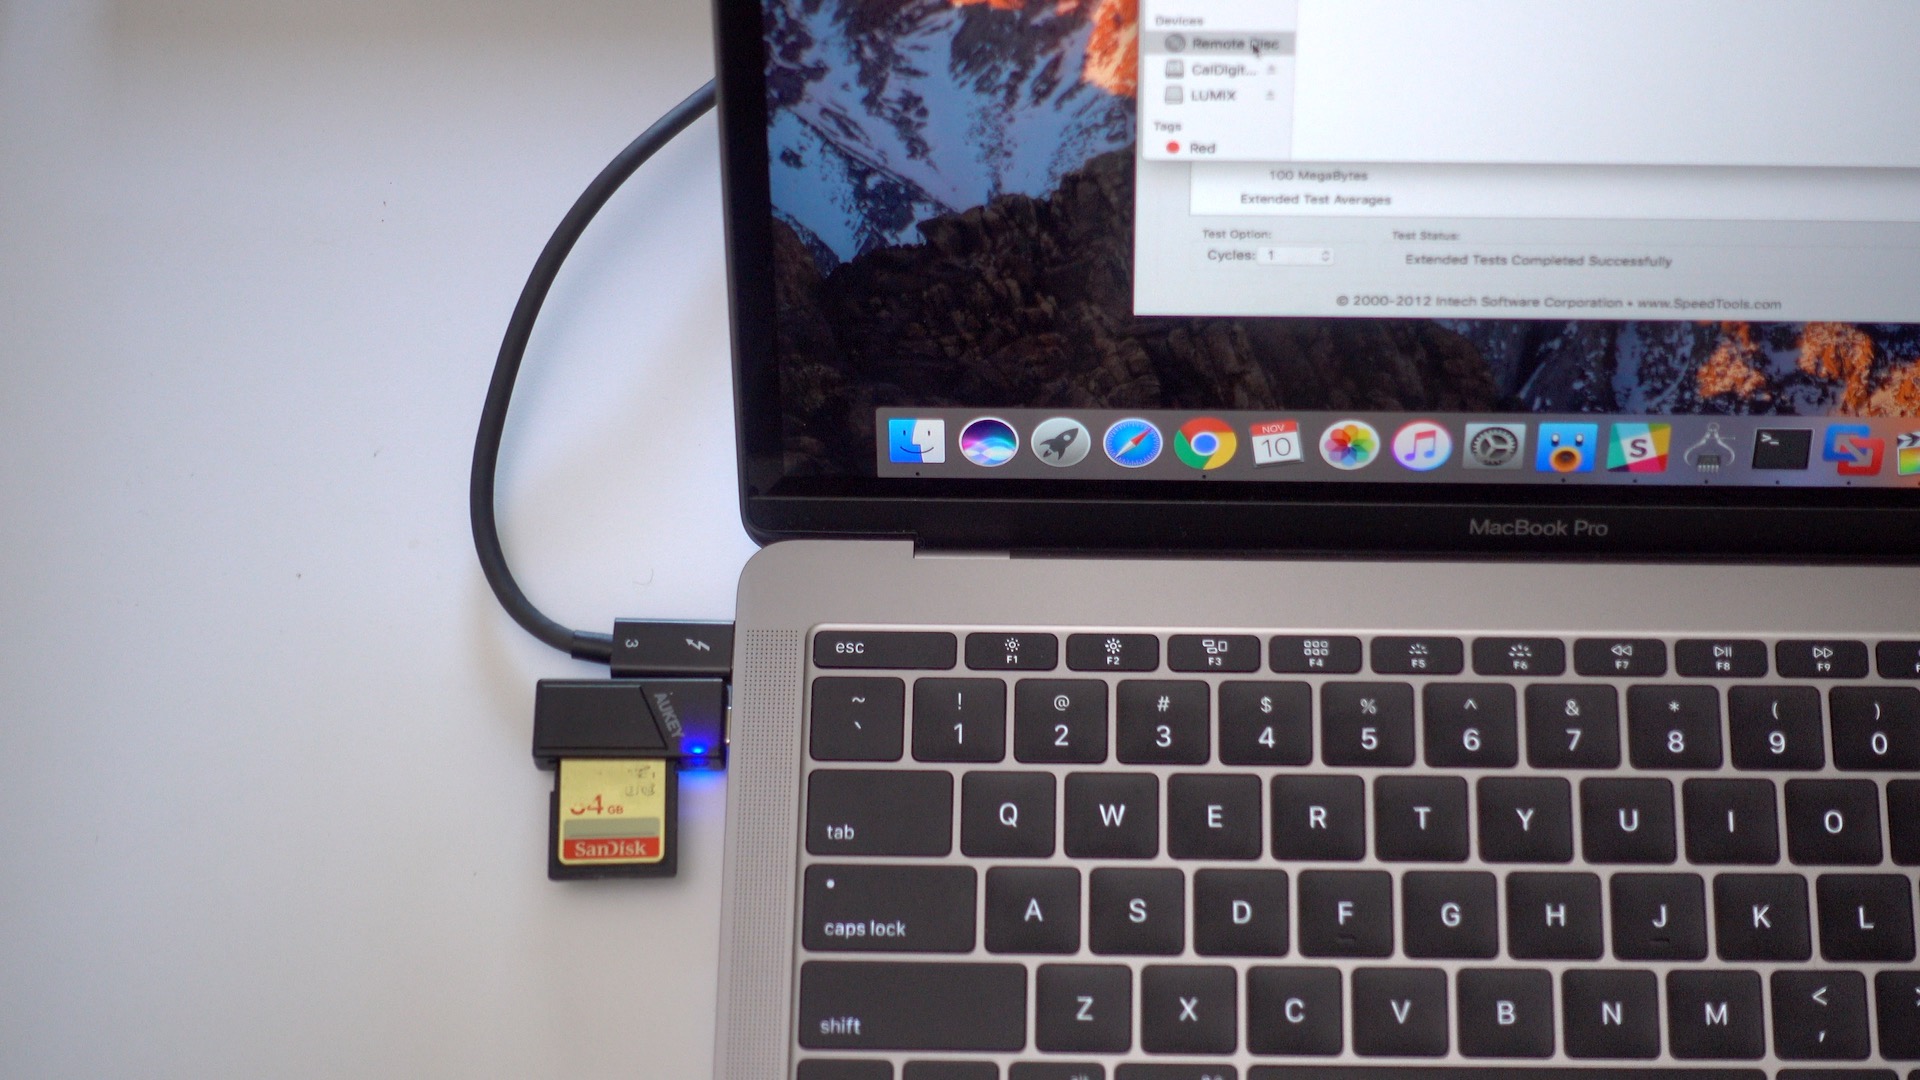 usb 3.1 card for mac review